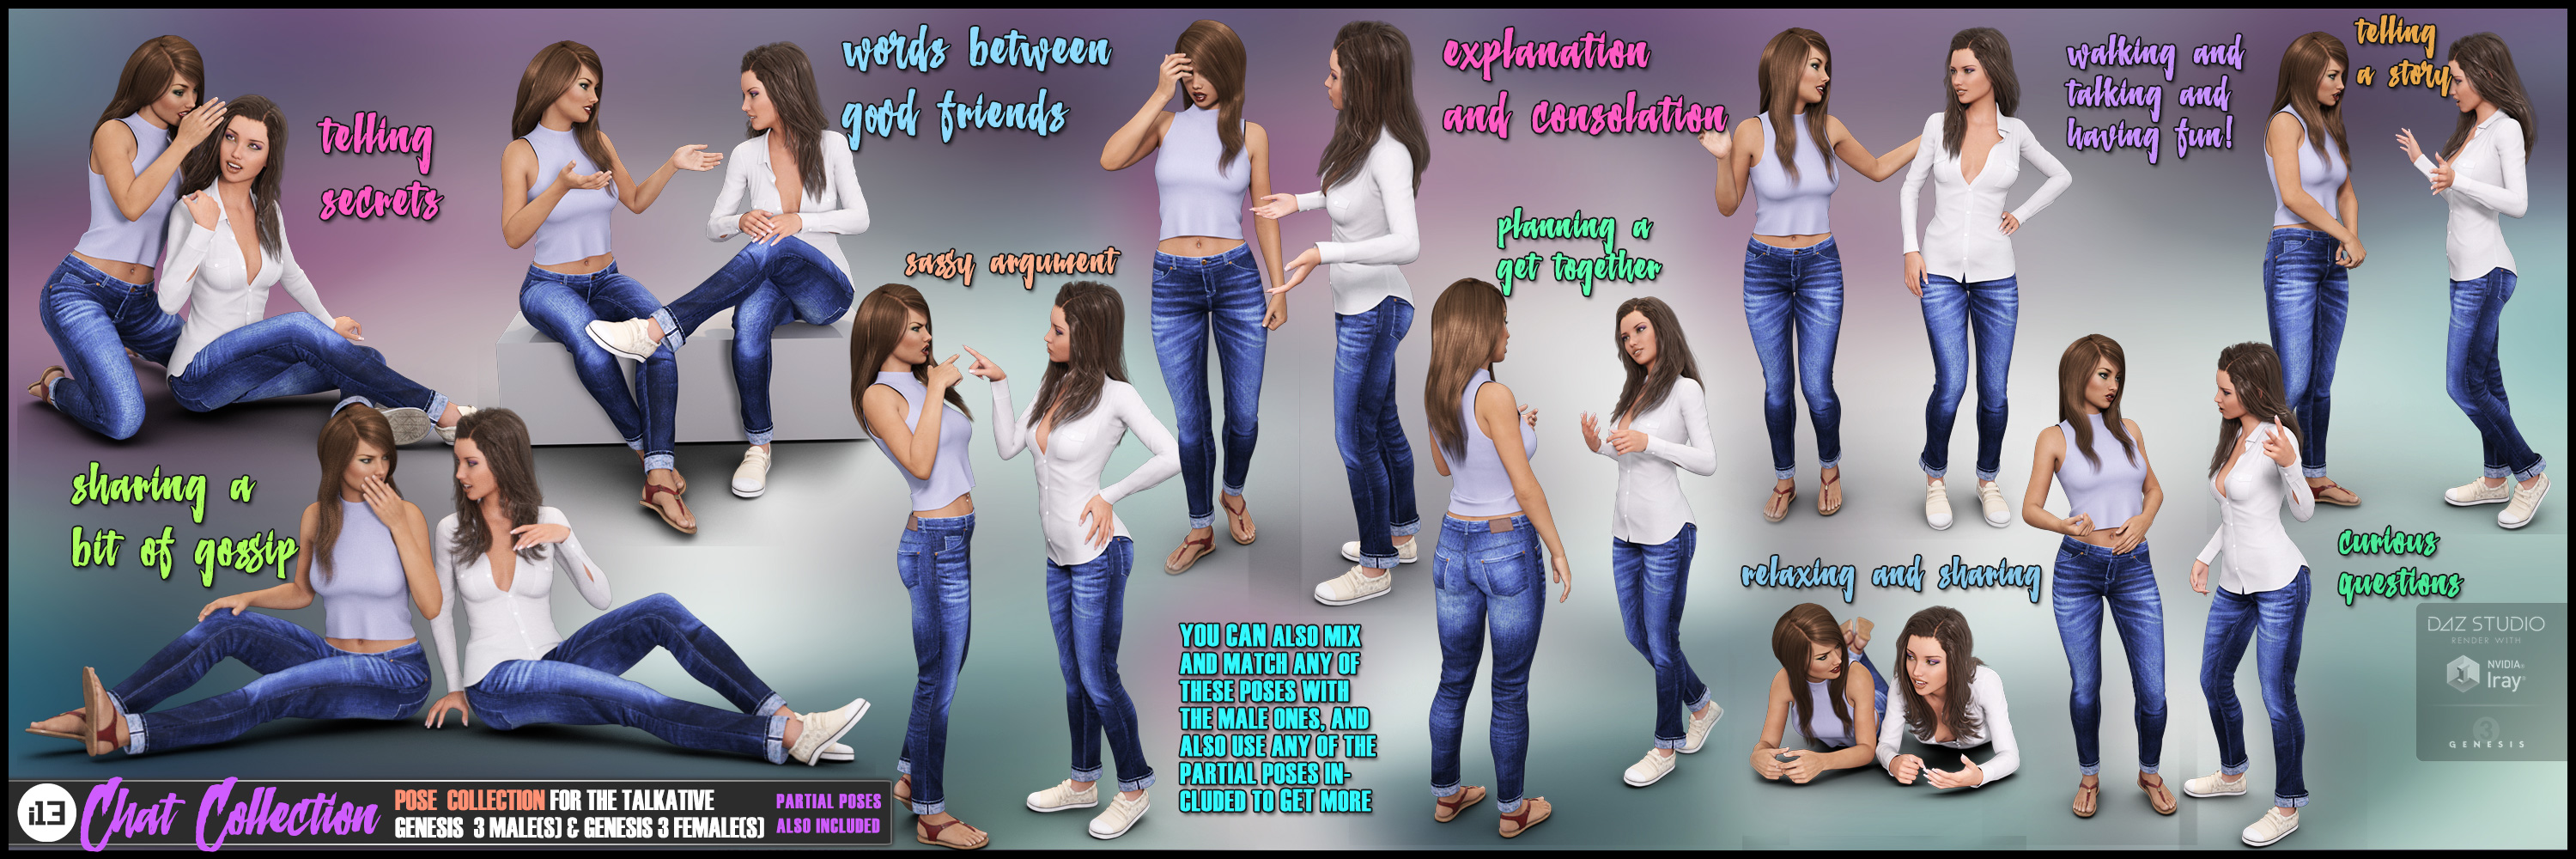 i13 Chat Collection Poses for the Genesis 3 Female(s) and Genesis 3 Male(s) by: ironman13, 3D Models by Daz 3D